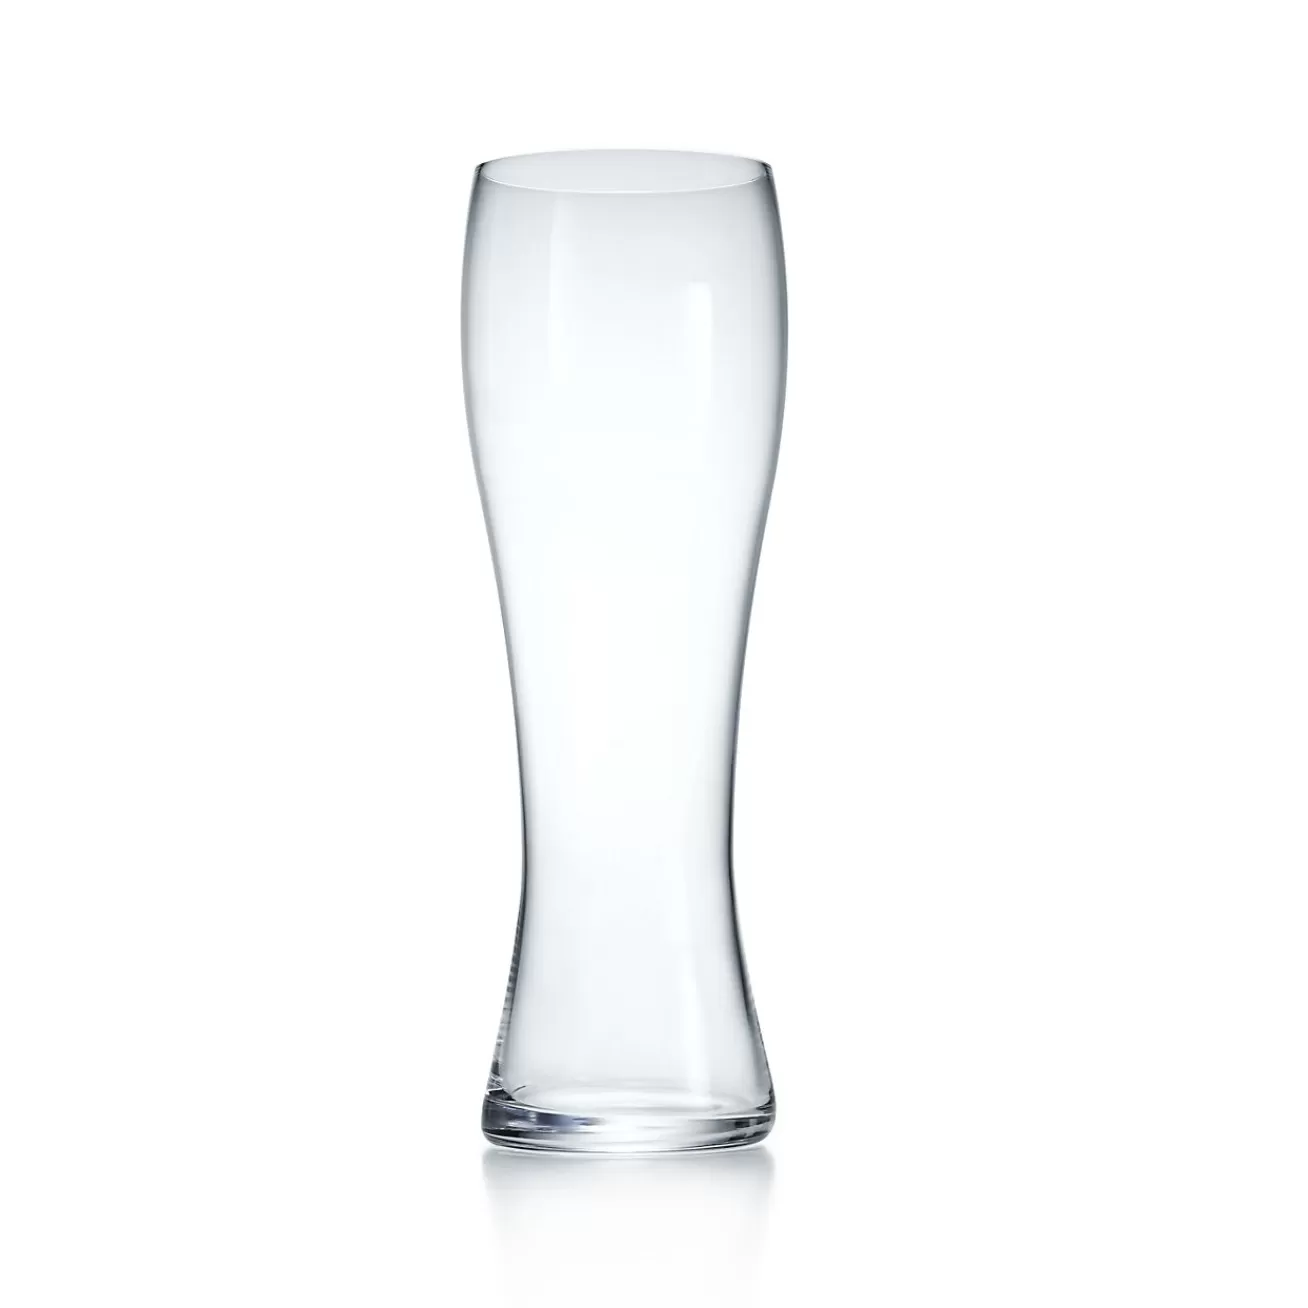 Tiffany & Co. Wheat beer glass in crystal. | ^ The Couple | Wedding Gifts